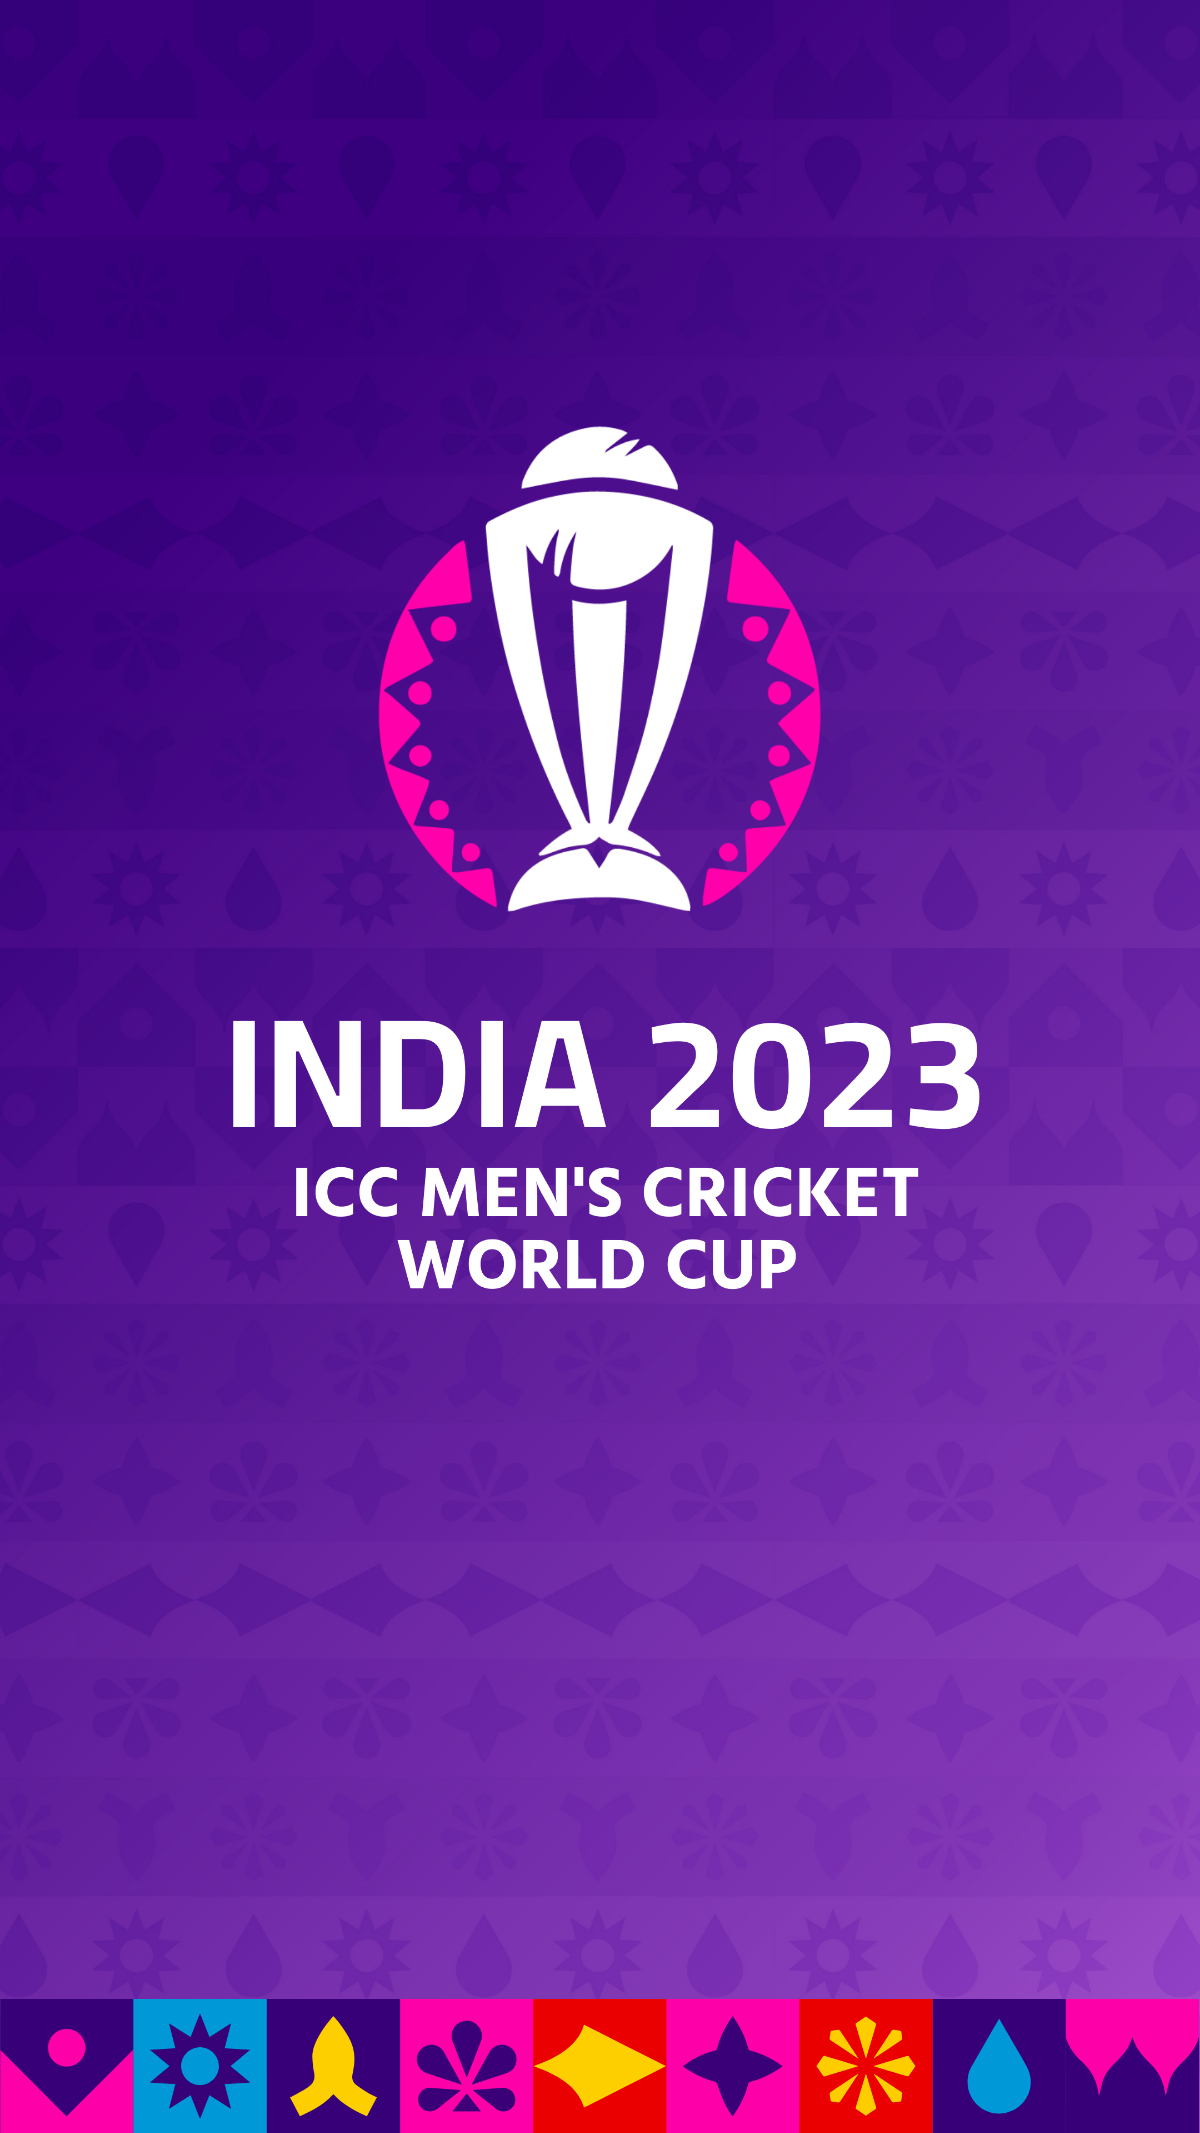 Free 2023 ICC Men's Cricket World Cup Phone Wallpaper Template